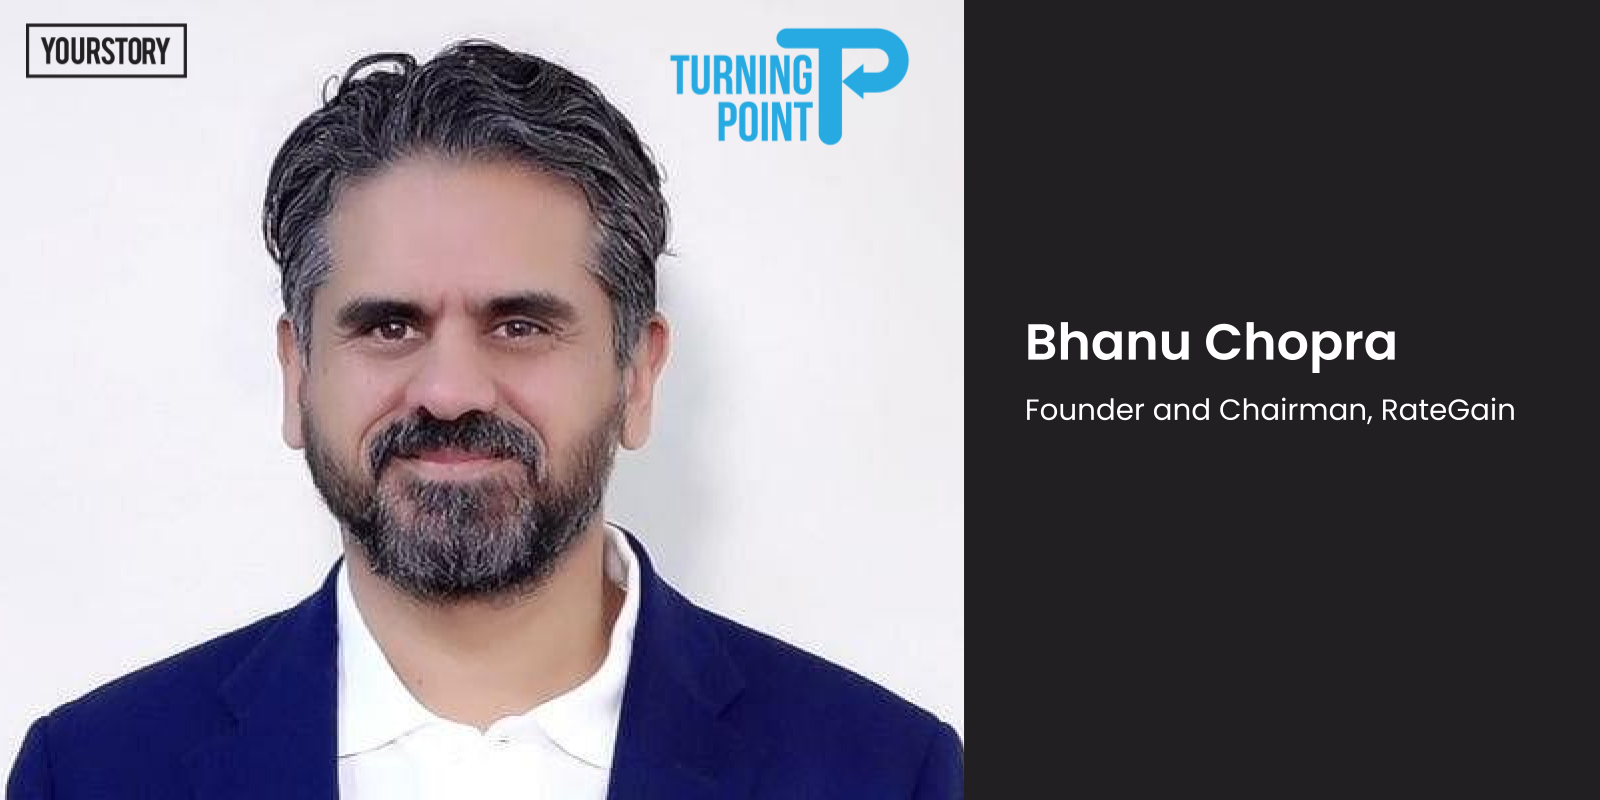 [The Turning Point] How absence of capital and a timely pivot led Bhanu Chopra to start the first SaaS company to head for an IPO in India

